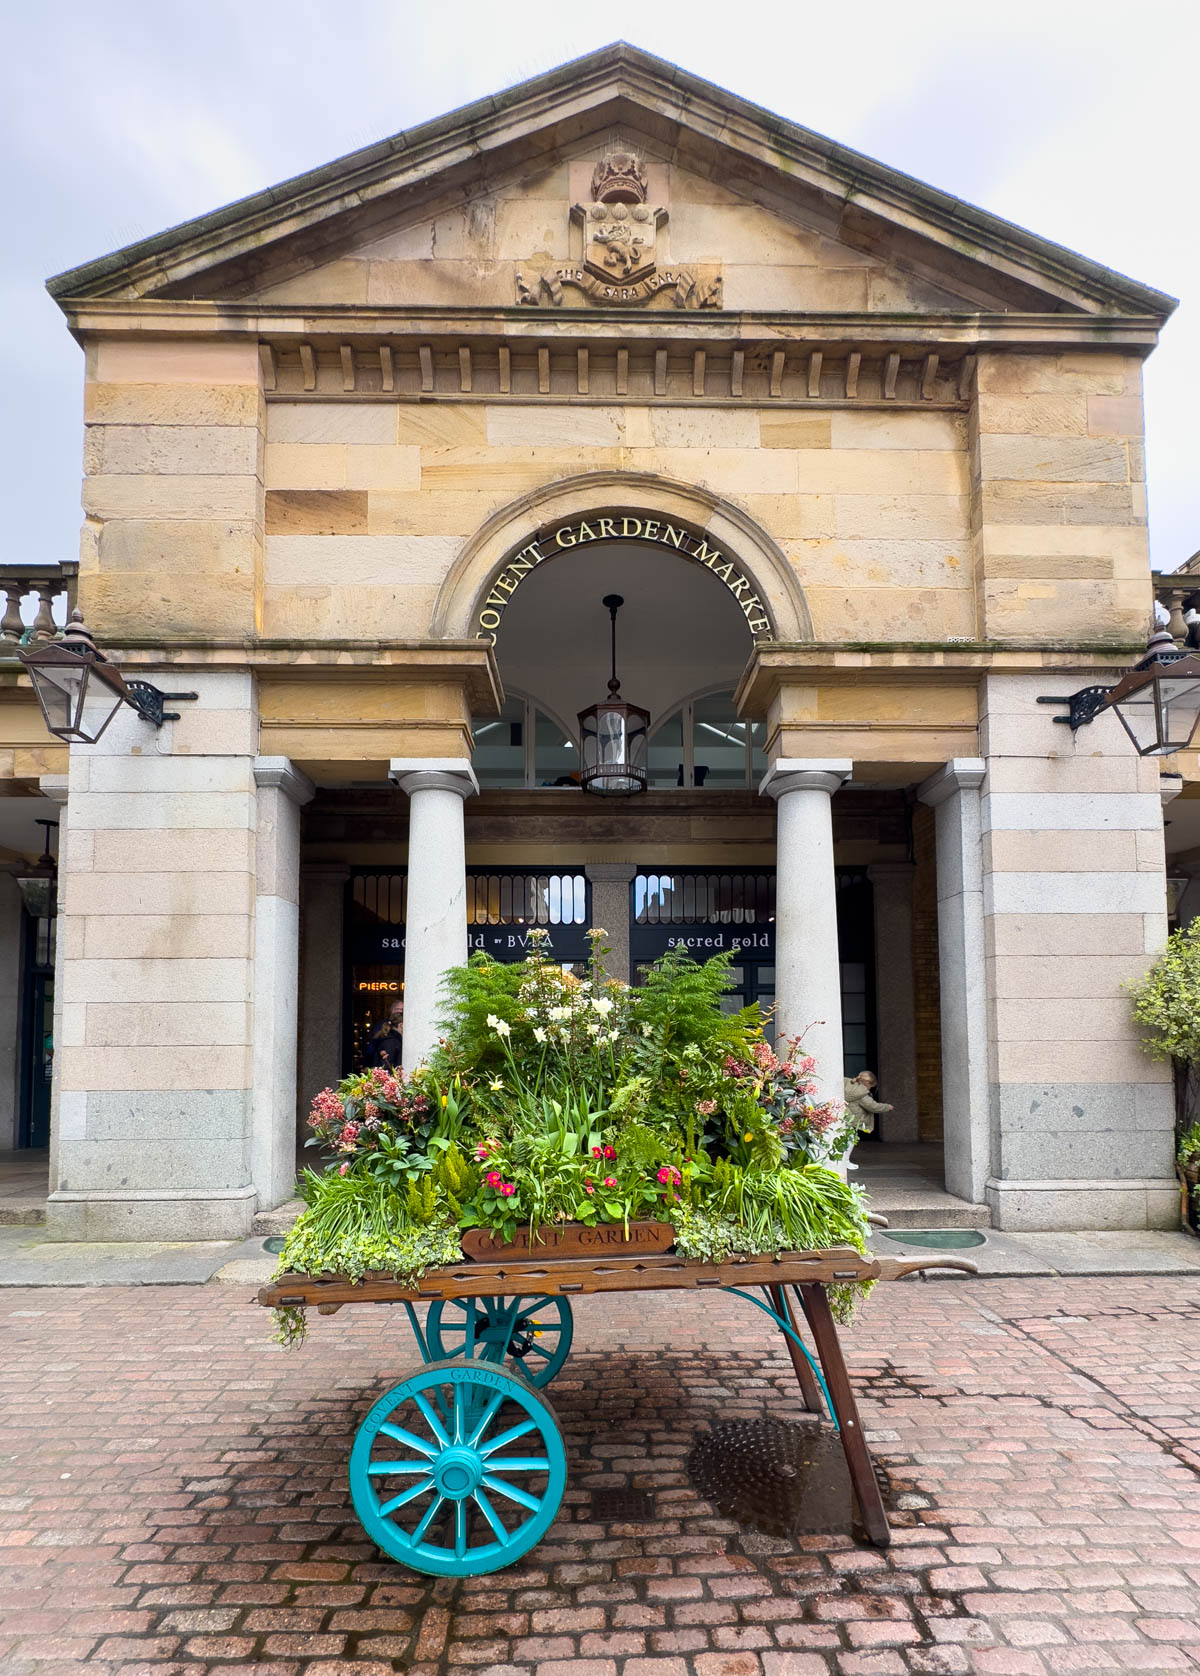 The entrance to Covent Garden has a large floral display in front.